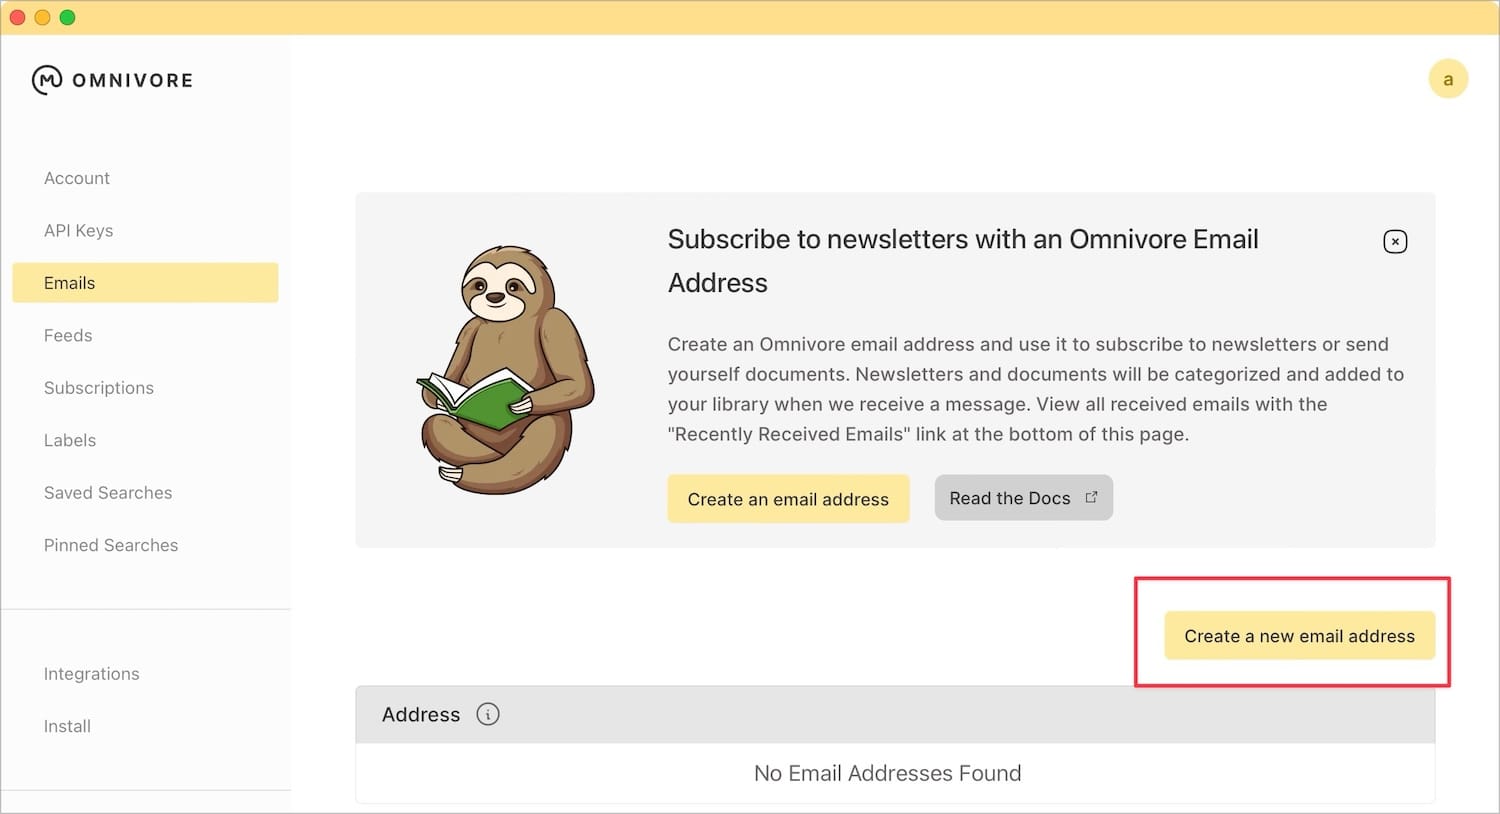 Creating an email address in Omnivore